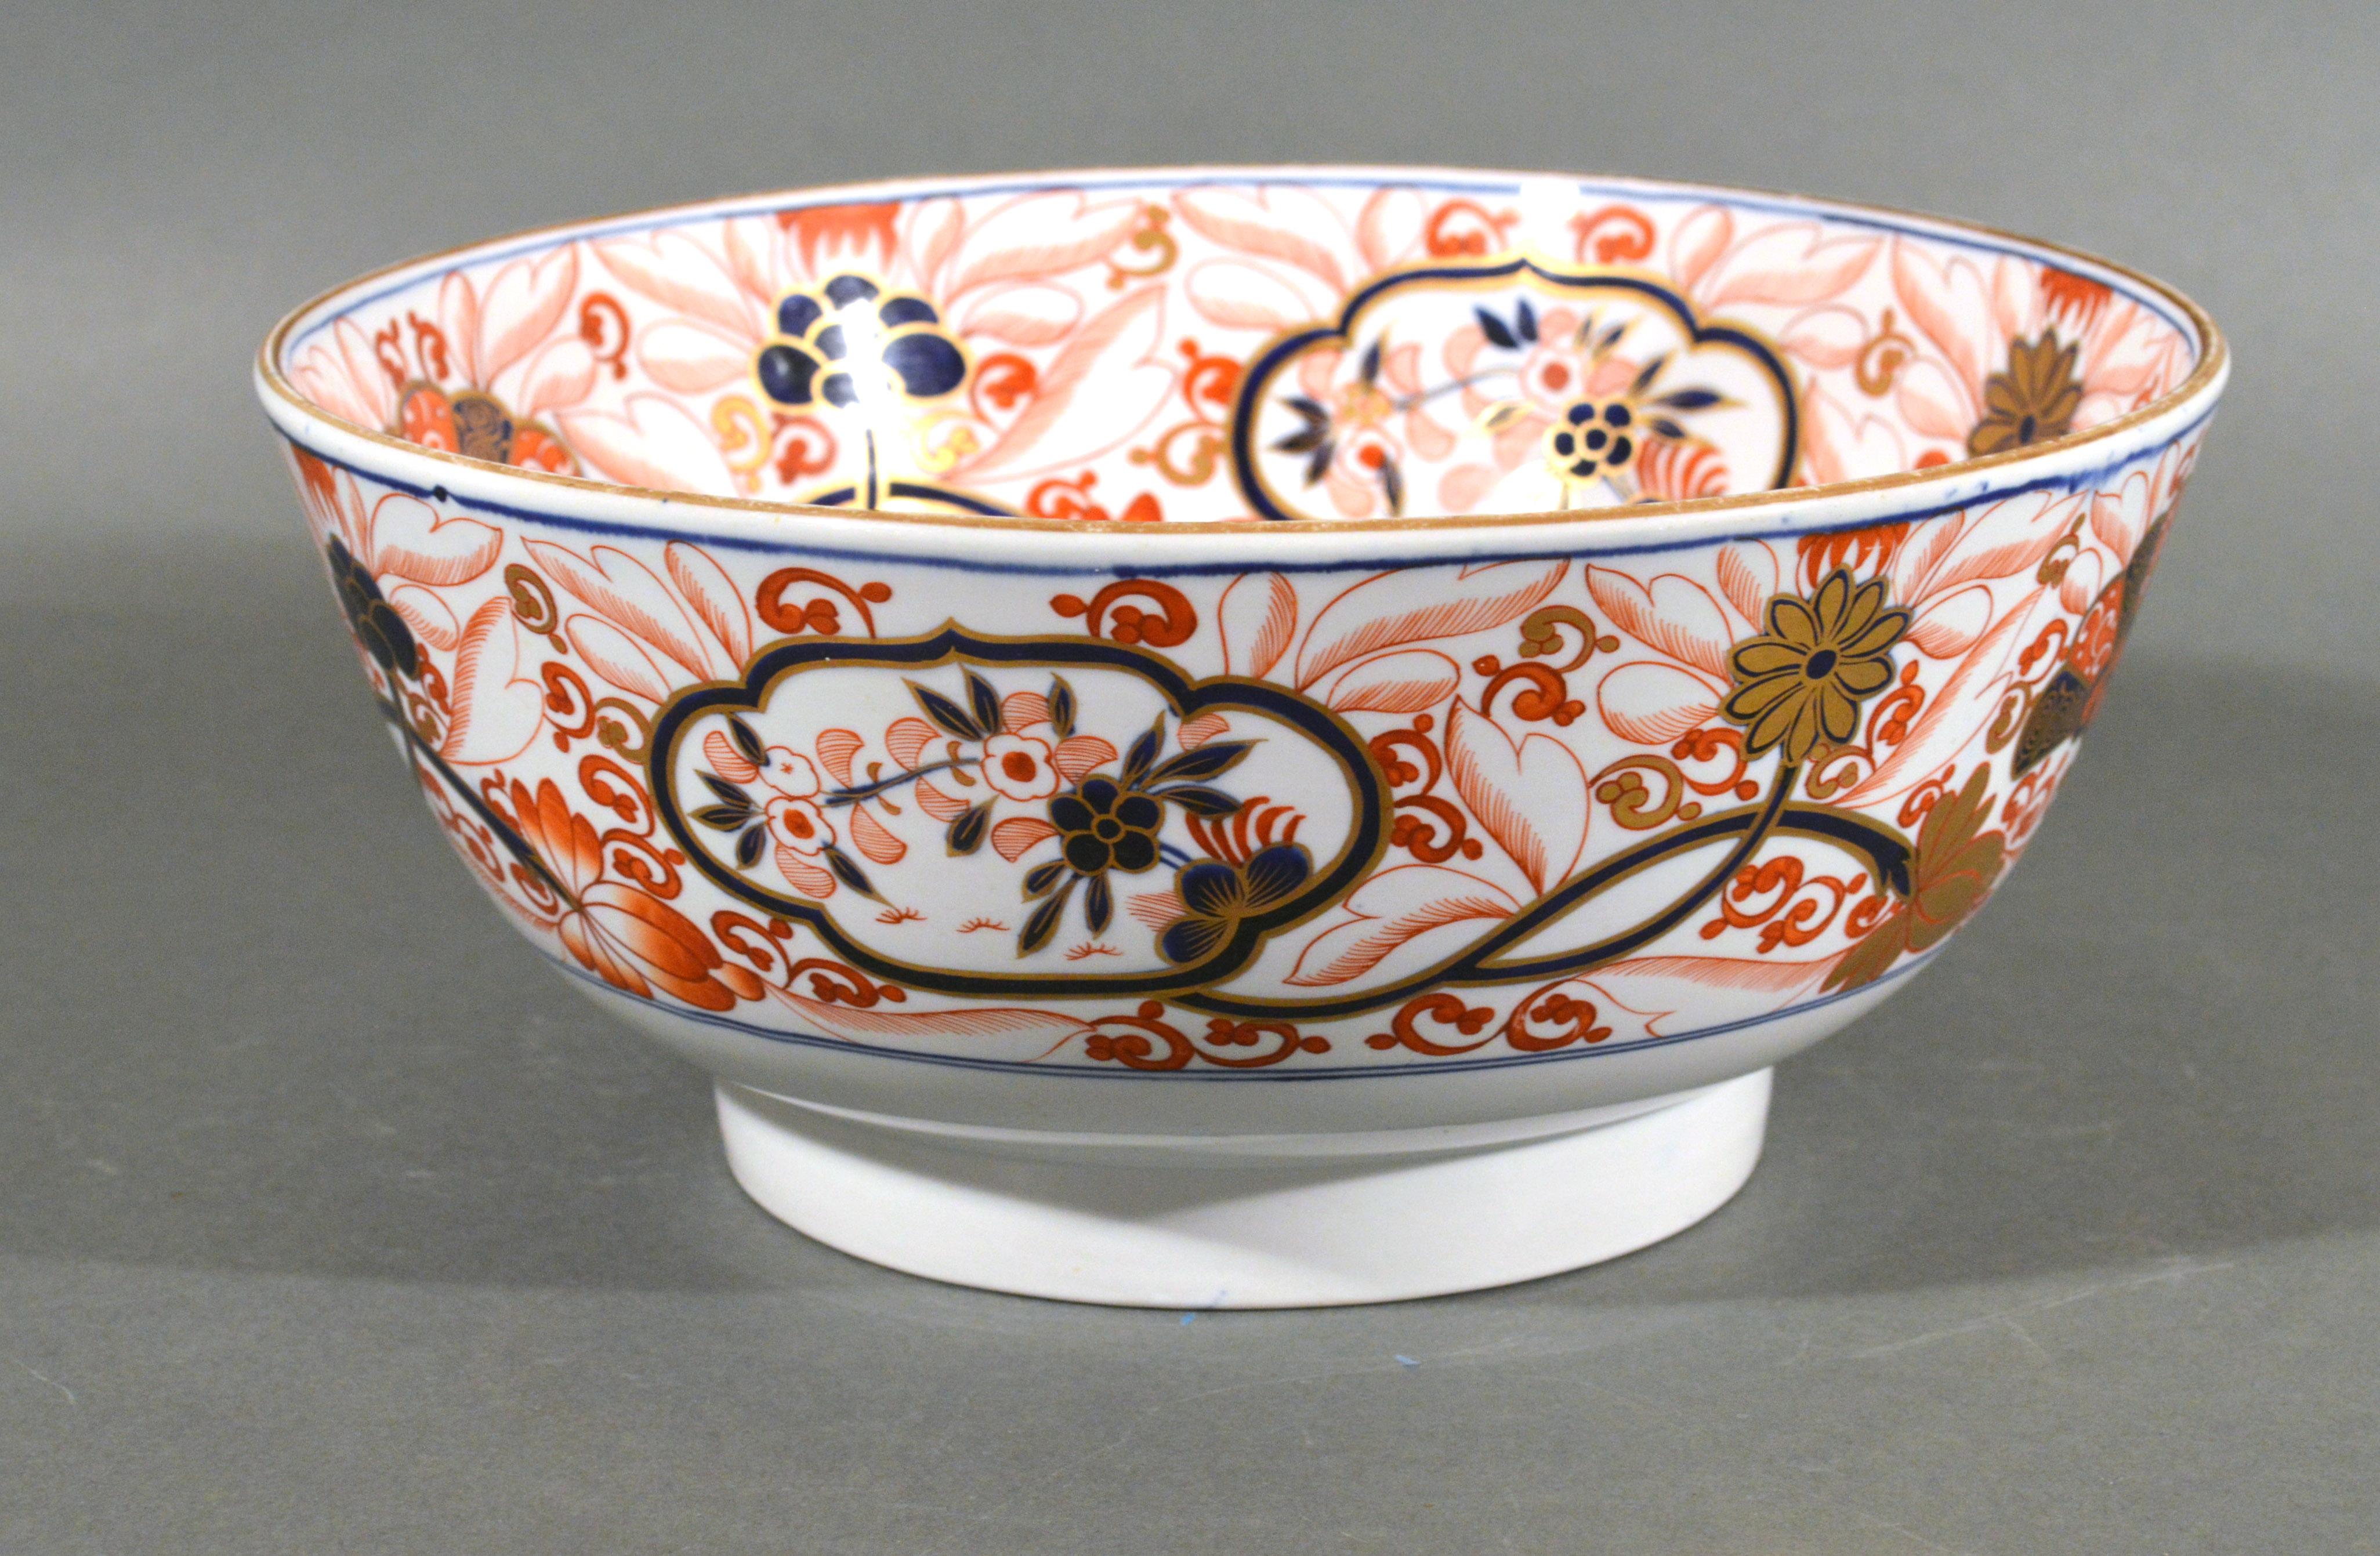 Spode Imari Bowl,
Pattern # 2283,
Spodes New Stone China,
Circa 1815-1820

The beautiful Spode new stone Imari punch bowl is painted in Imari colors with the pattern number 2283. The interior is fully painted with a jardinière issuing flowers,